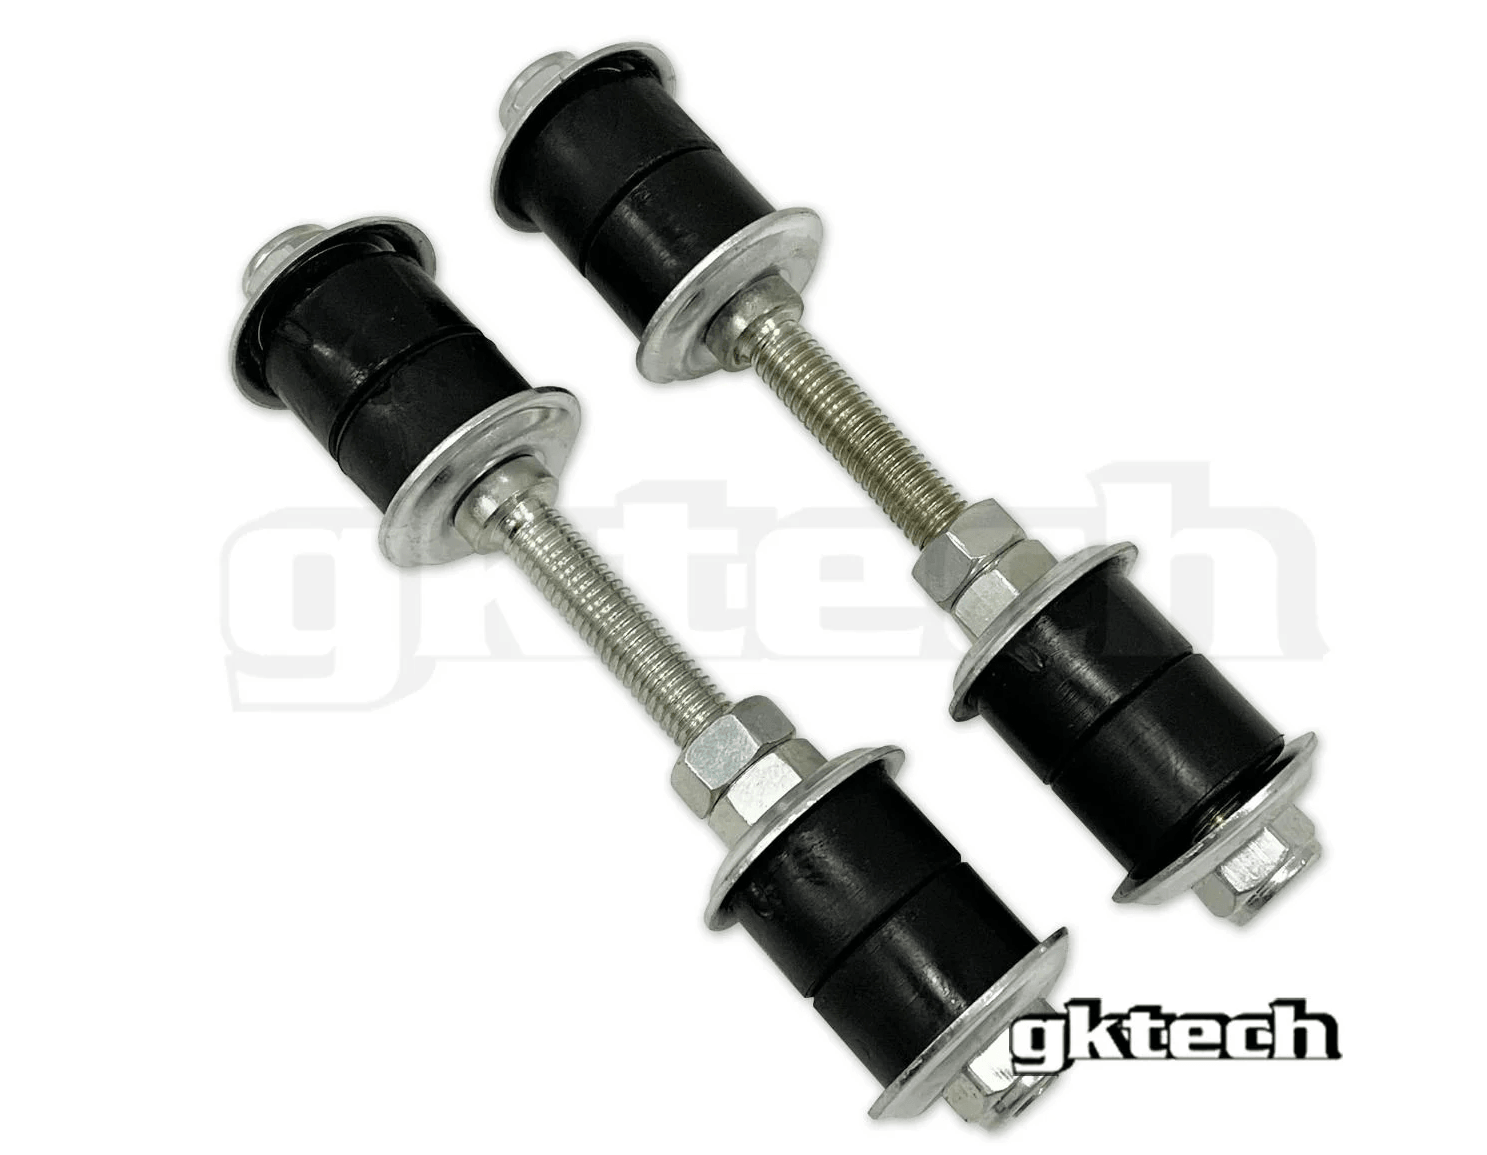 S/R CHASSIS REAR SWAYBAR END LINKSgktechProlink Performance